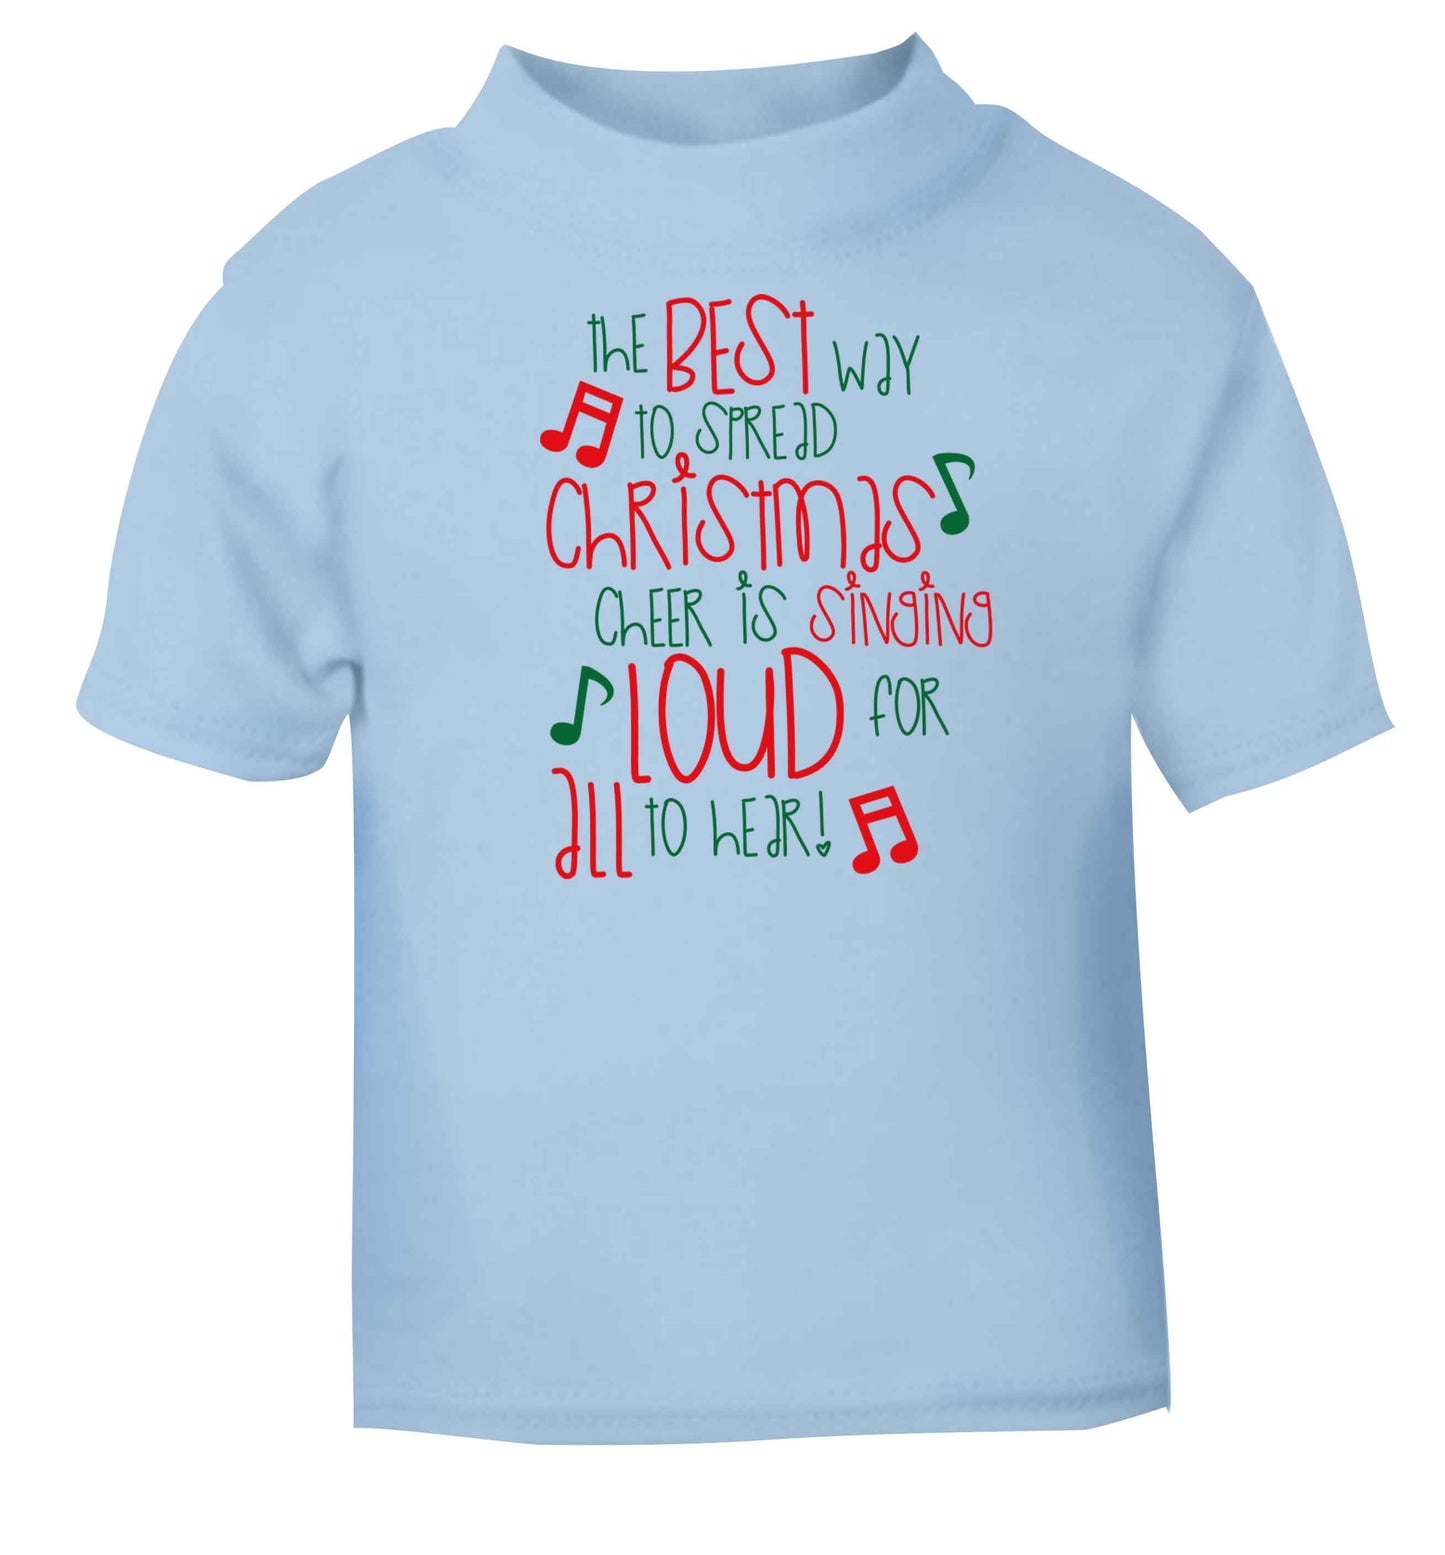 The best way to spread Christmas cheer is singing loud for all to hear light blue baby toddler Tshirt 2 Years